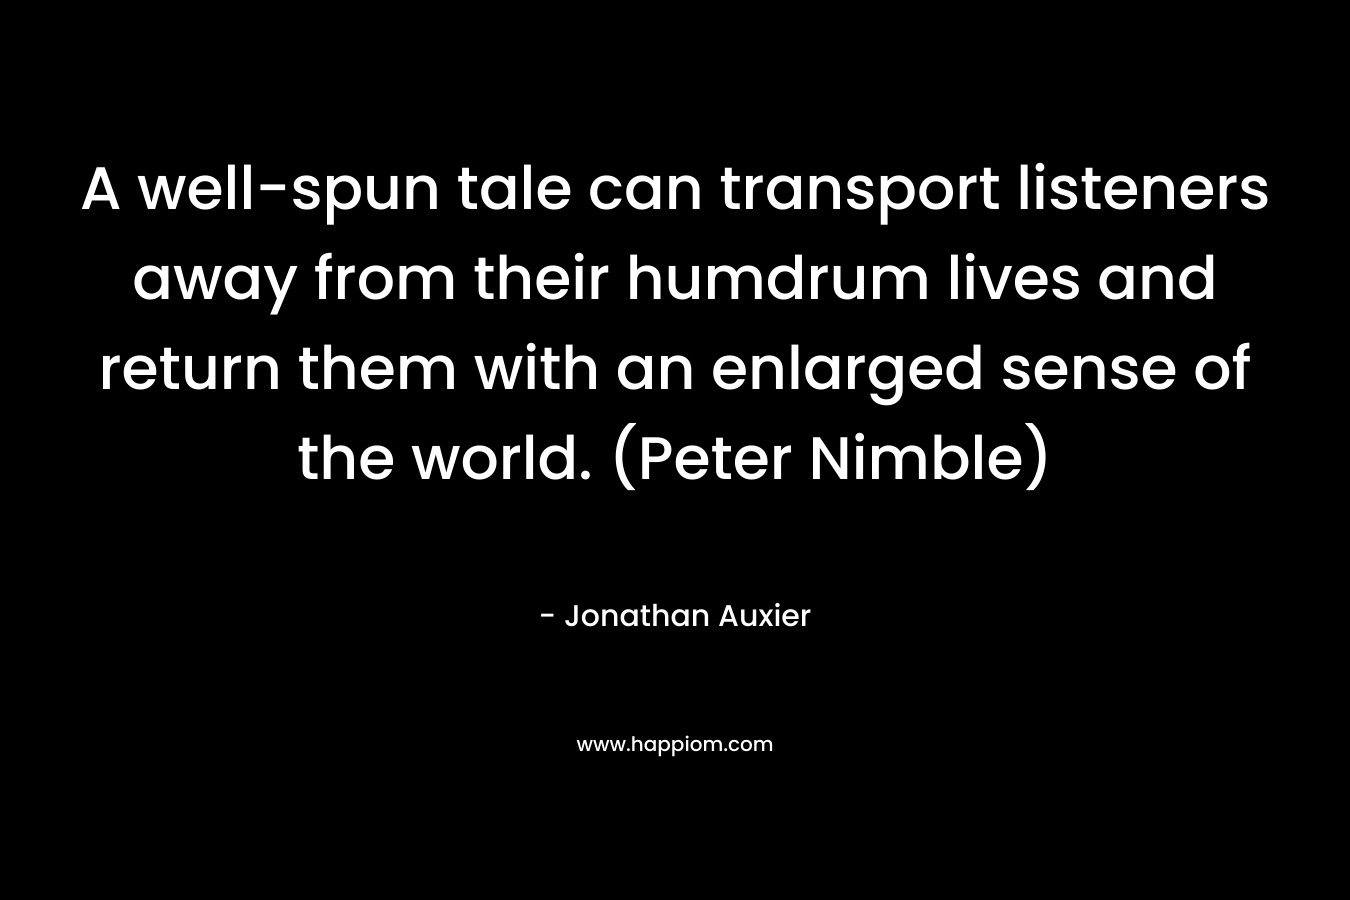 A well-spun tale can transport listeners away from their humdrum lives and return them with an enlarged sense of the world. (Peter Nimble)